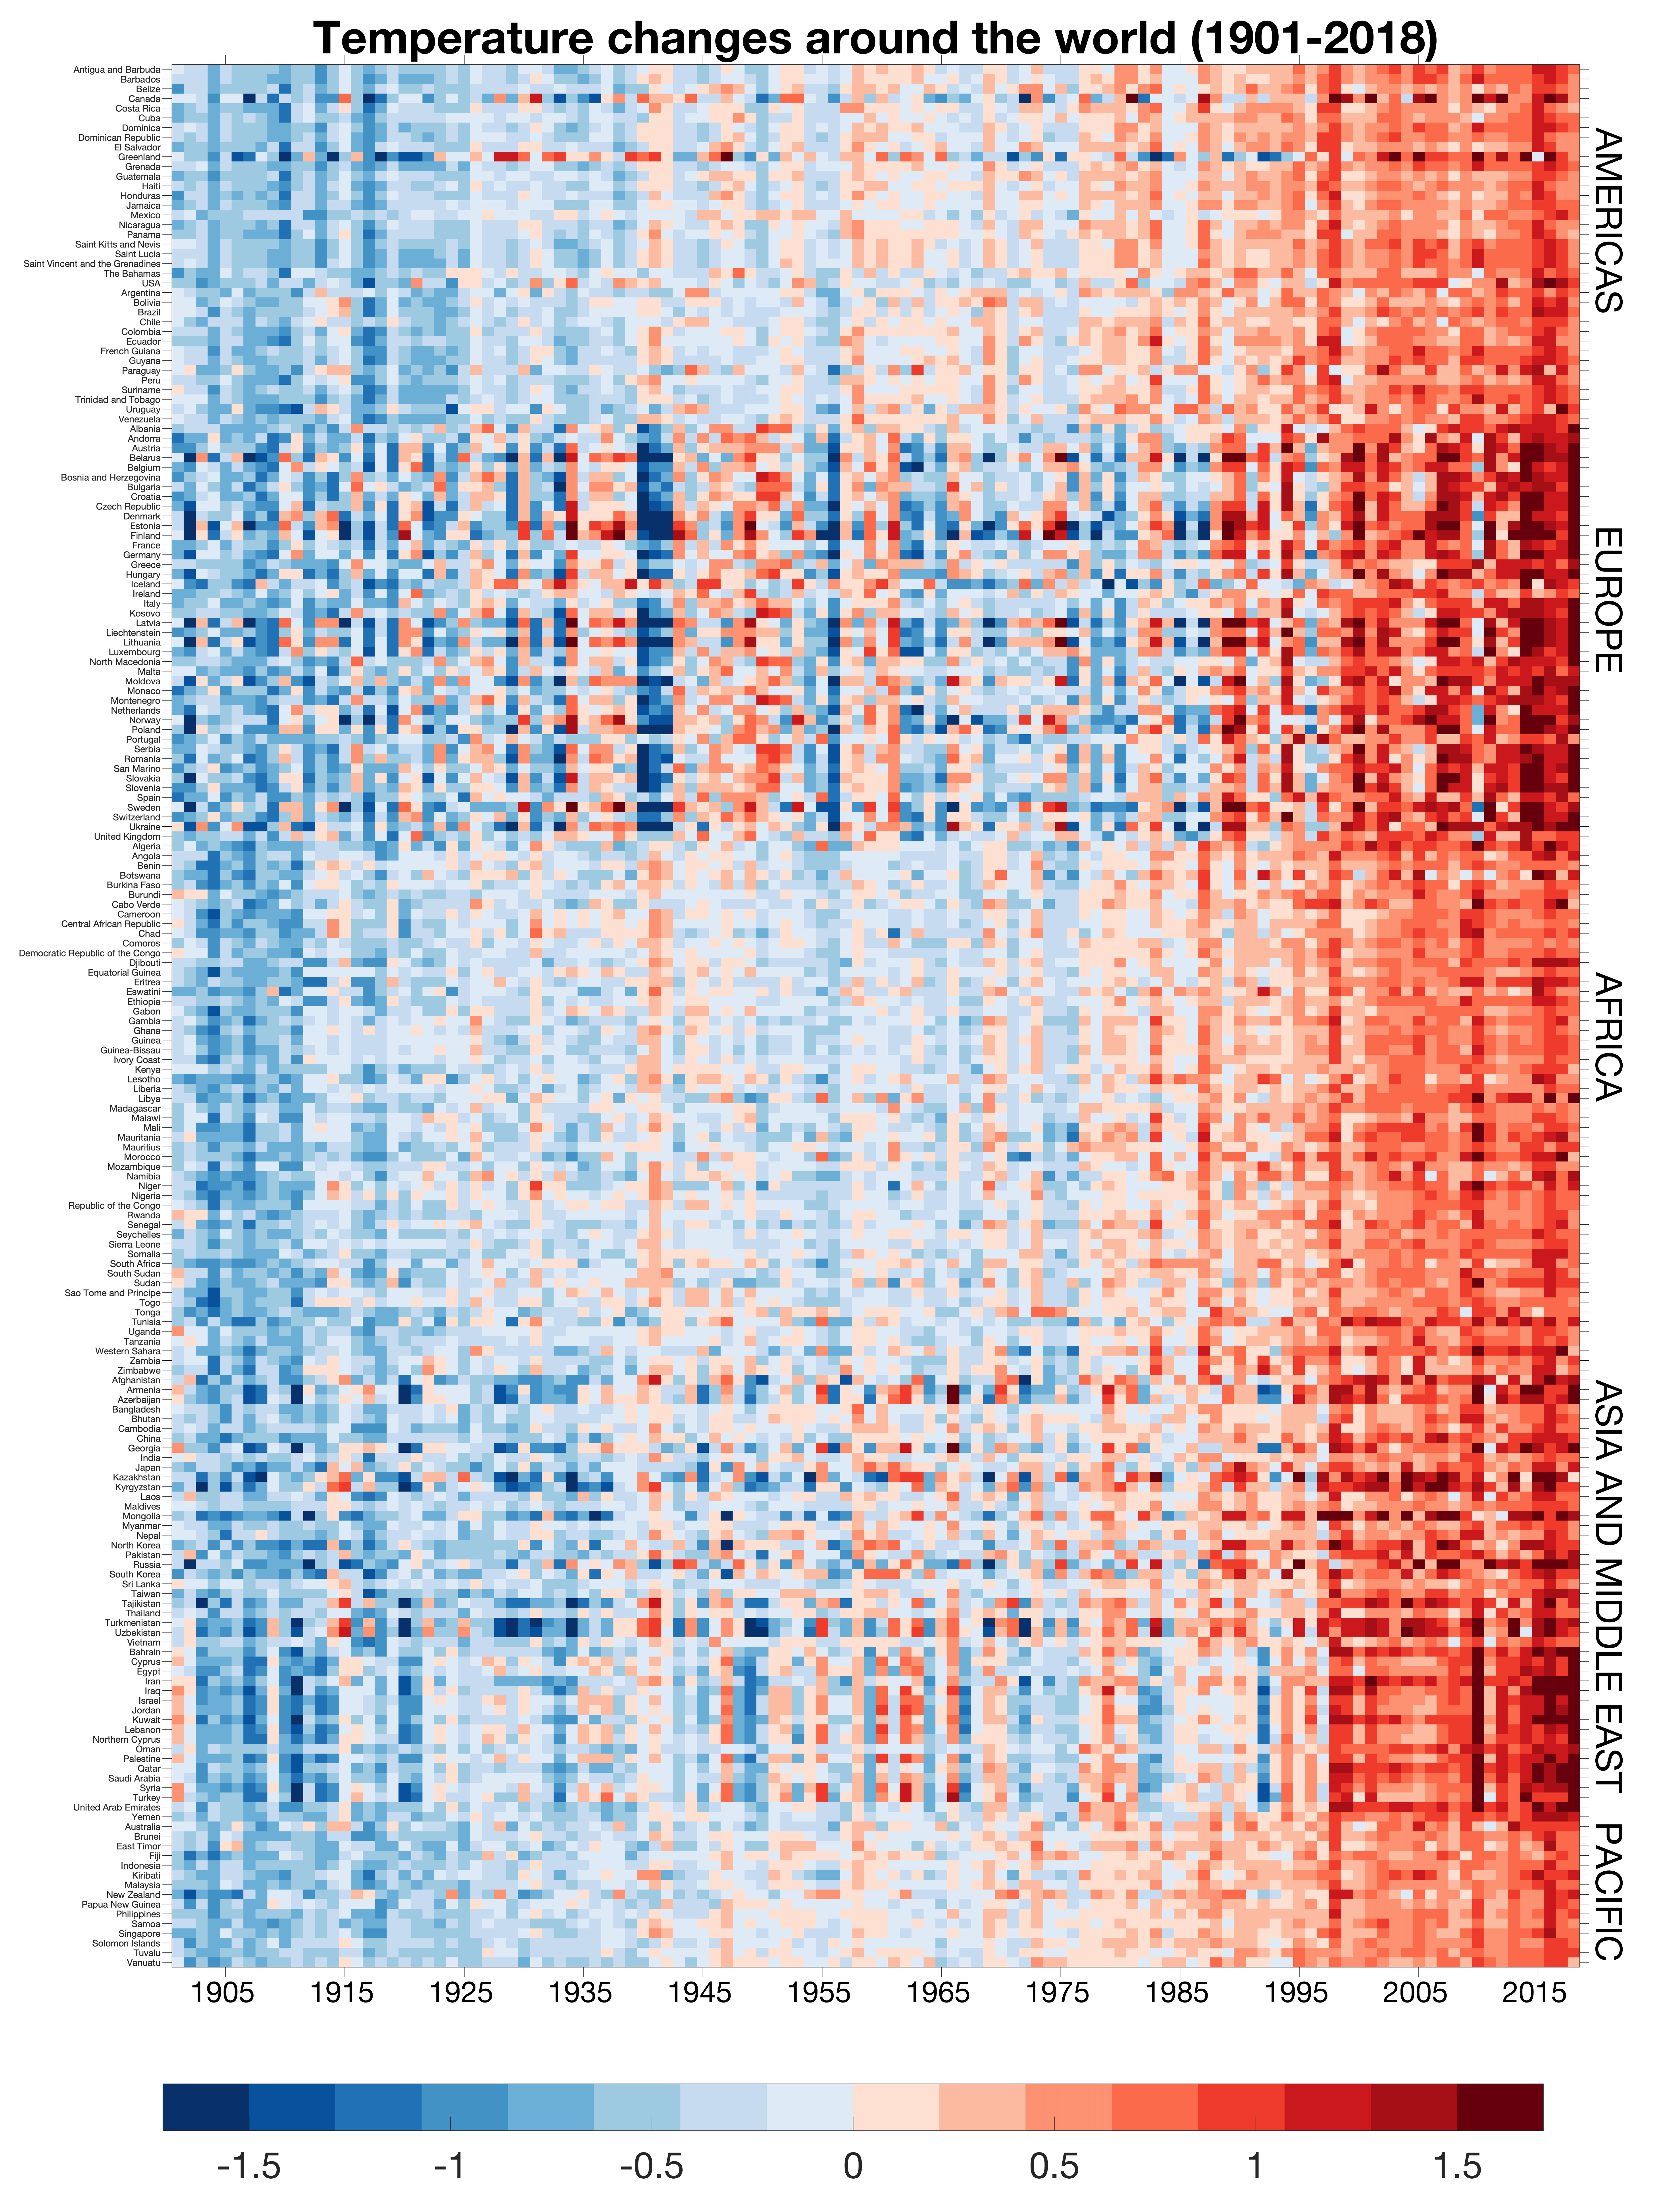 A heatmap showing the anomalies in yearly average temperatures in some 200 countries for the years 1900 to 2019